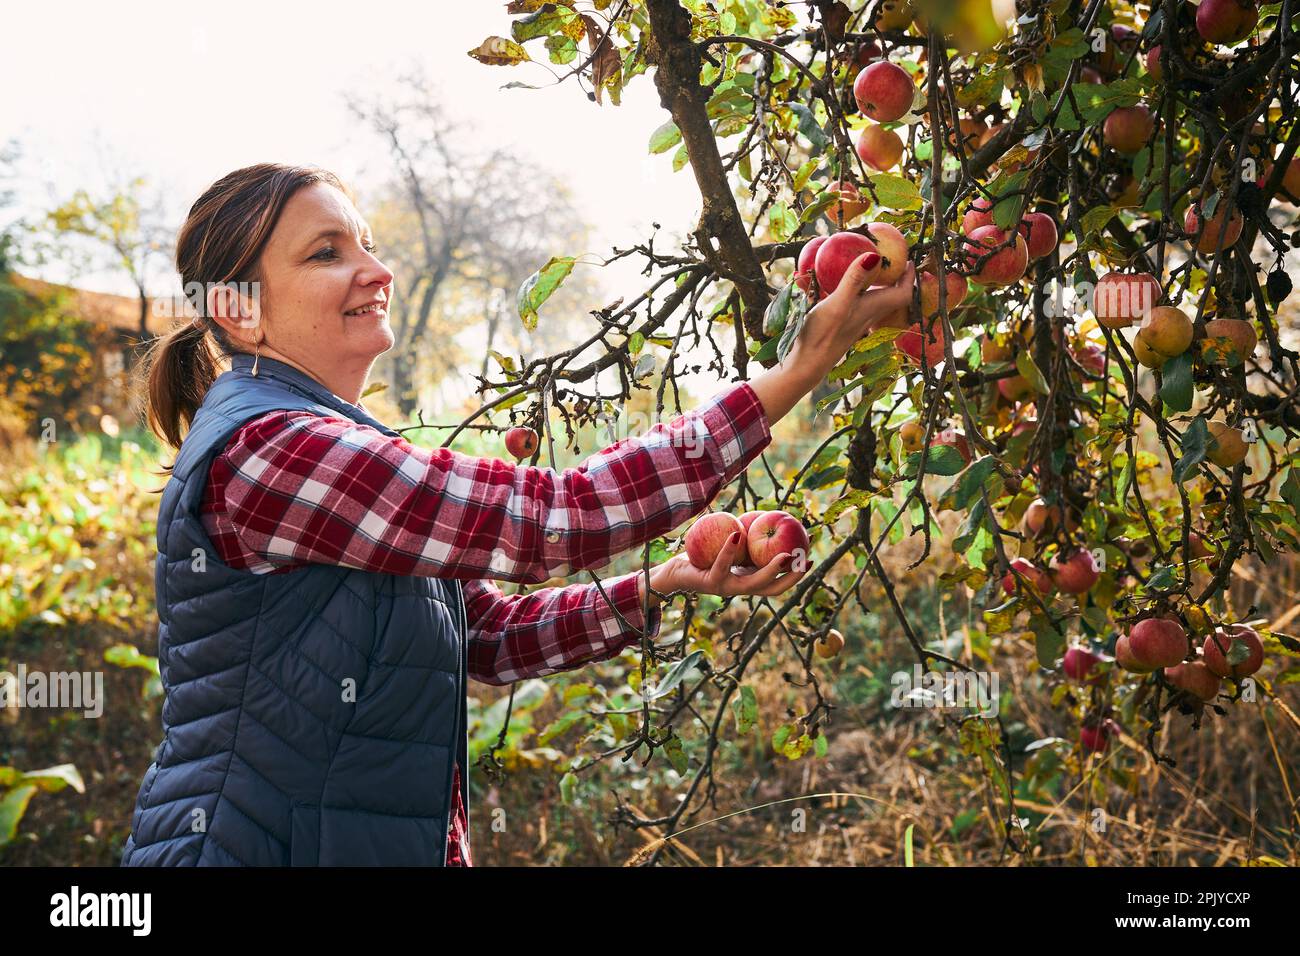 Woman Picking Ripe Apples On Farm Farmer Grabbing Apples From Tree In Orchard Fresh Healthy 8279